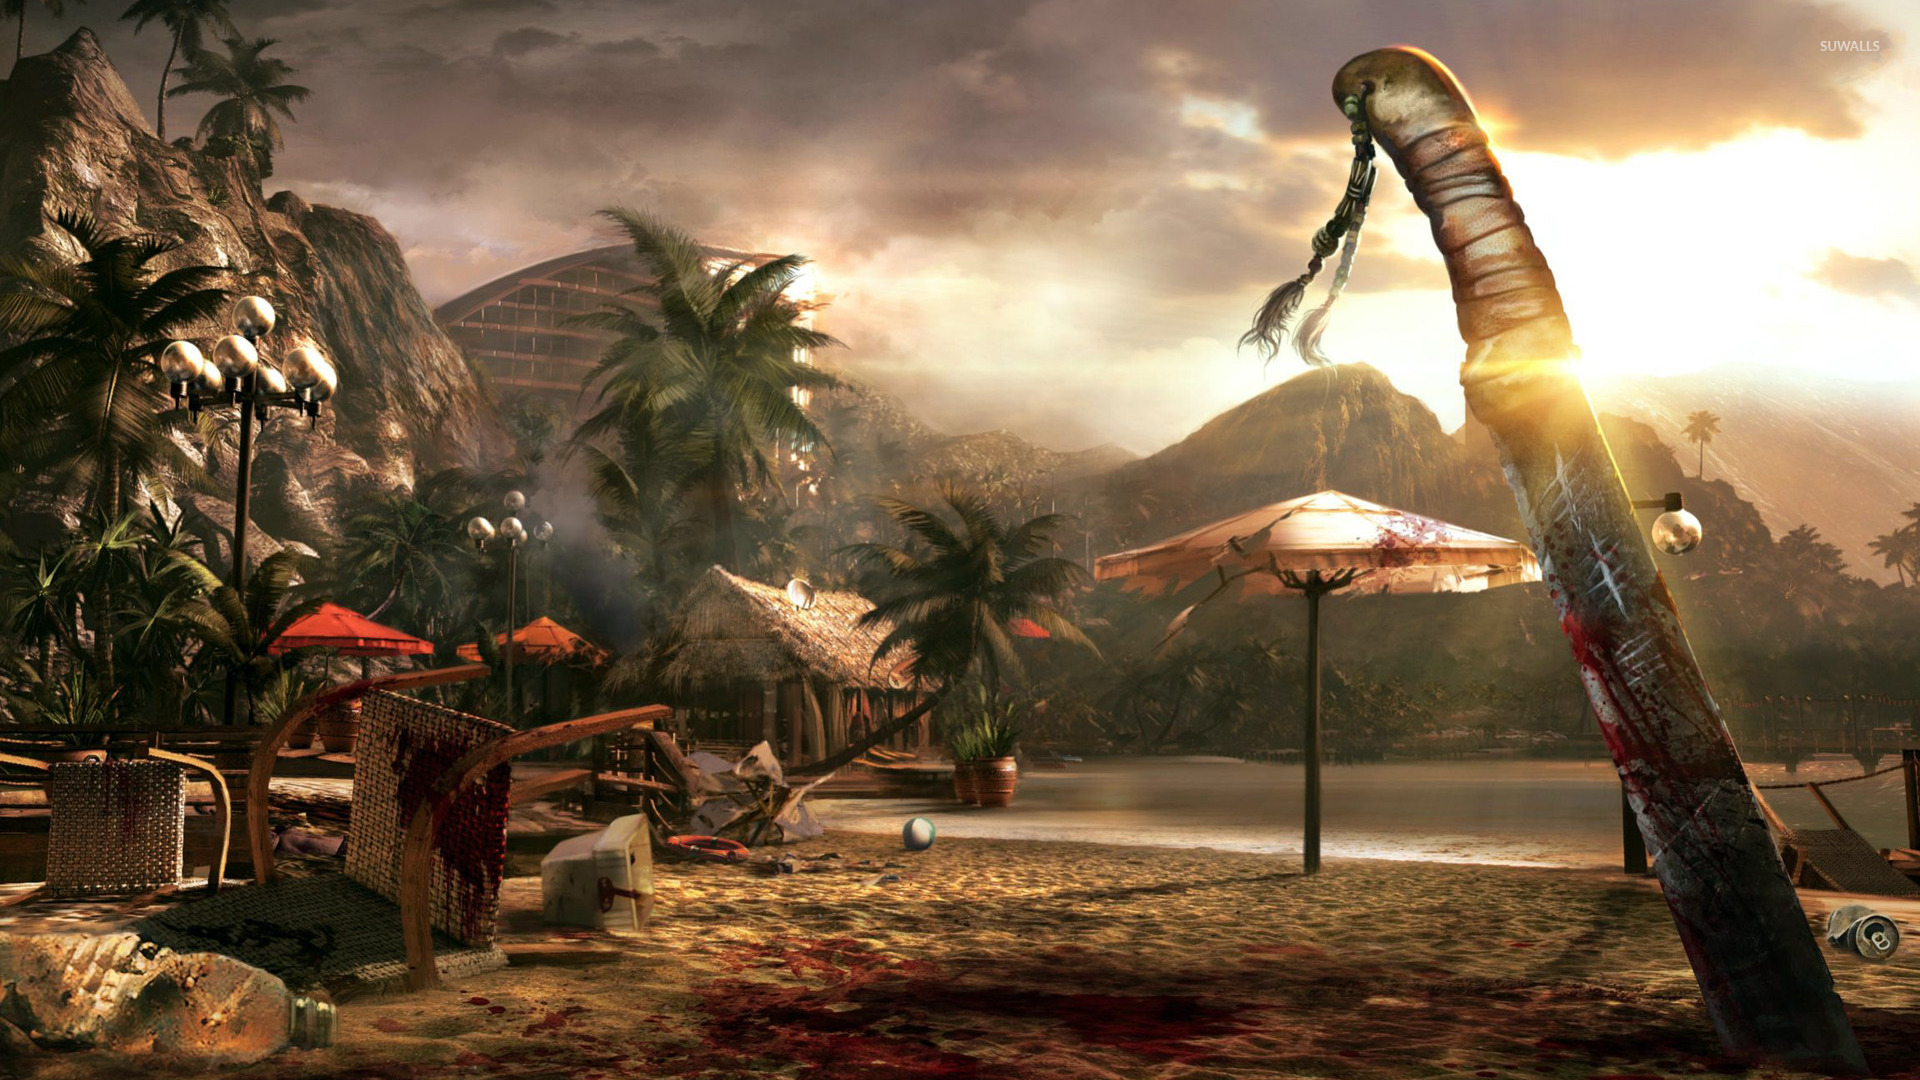 dead island 2 pc review